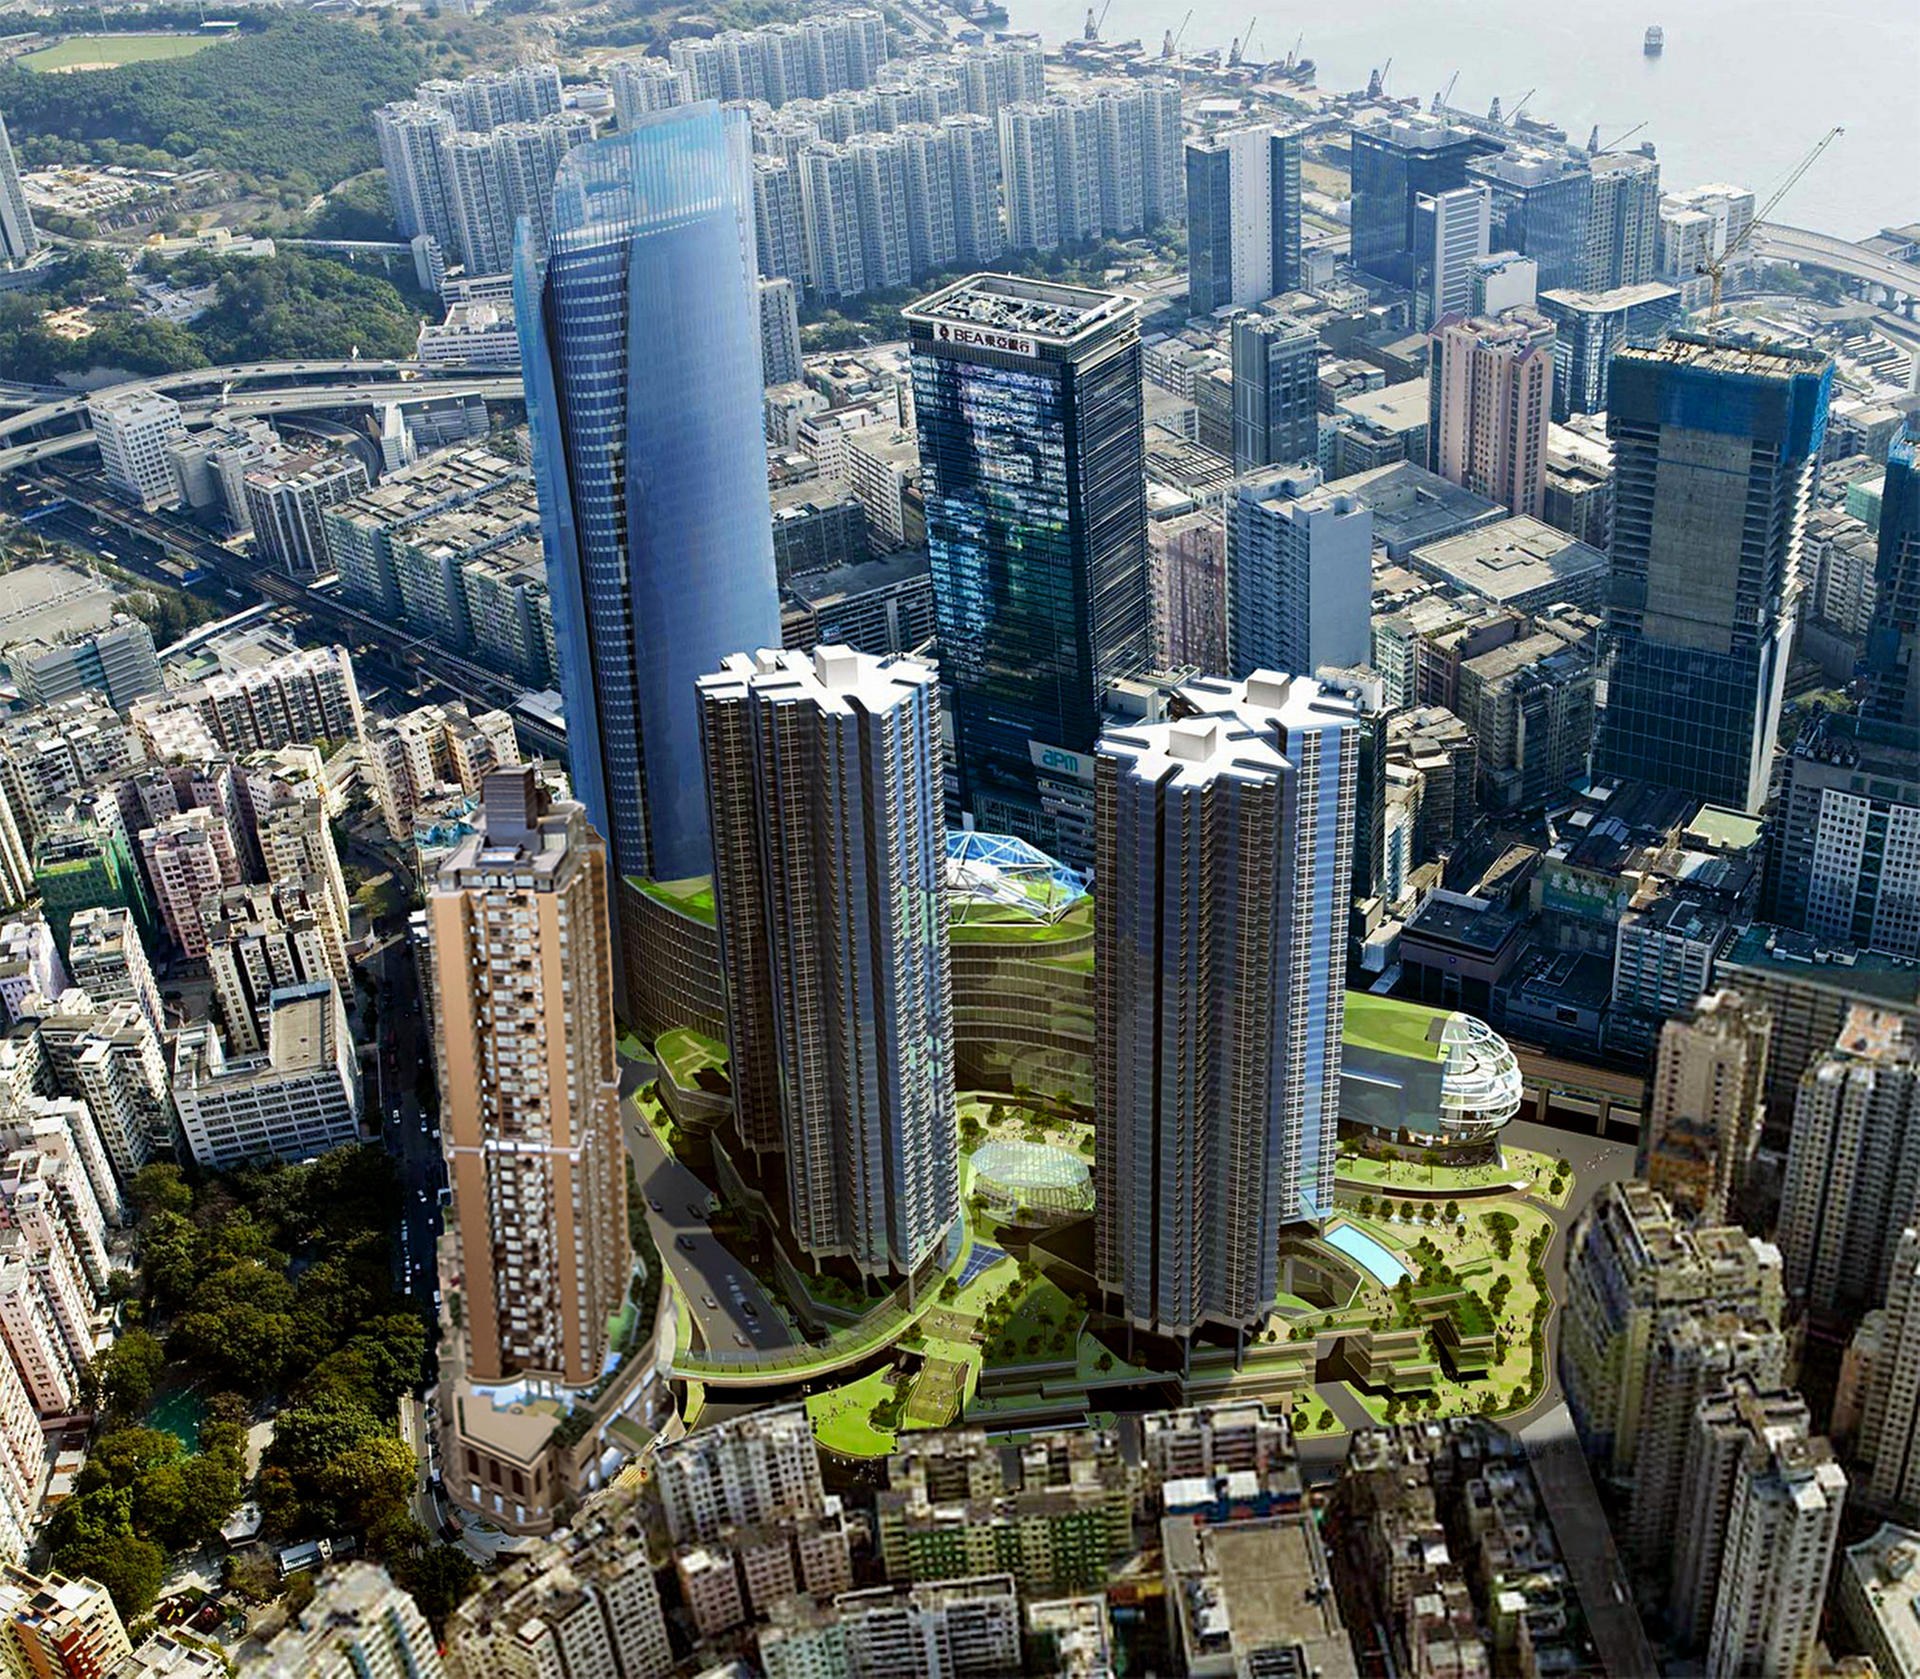 The redevelopment at Kwun Tong is the largest project undertaken by the URA, covering more than 5.35 hectares. Photo: SCMP 